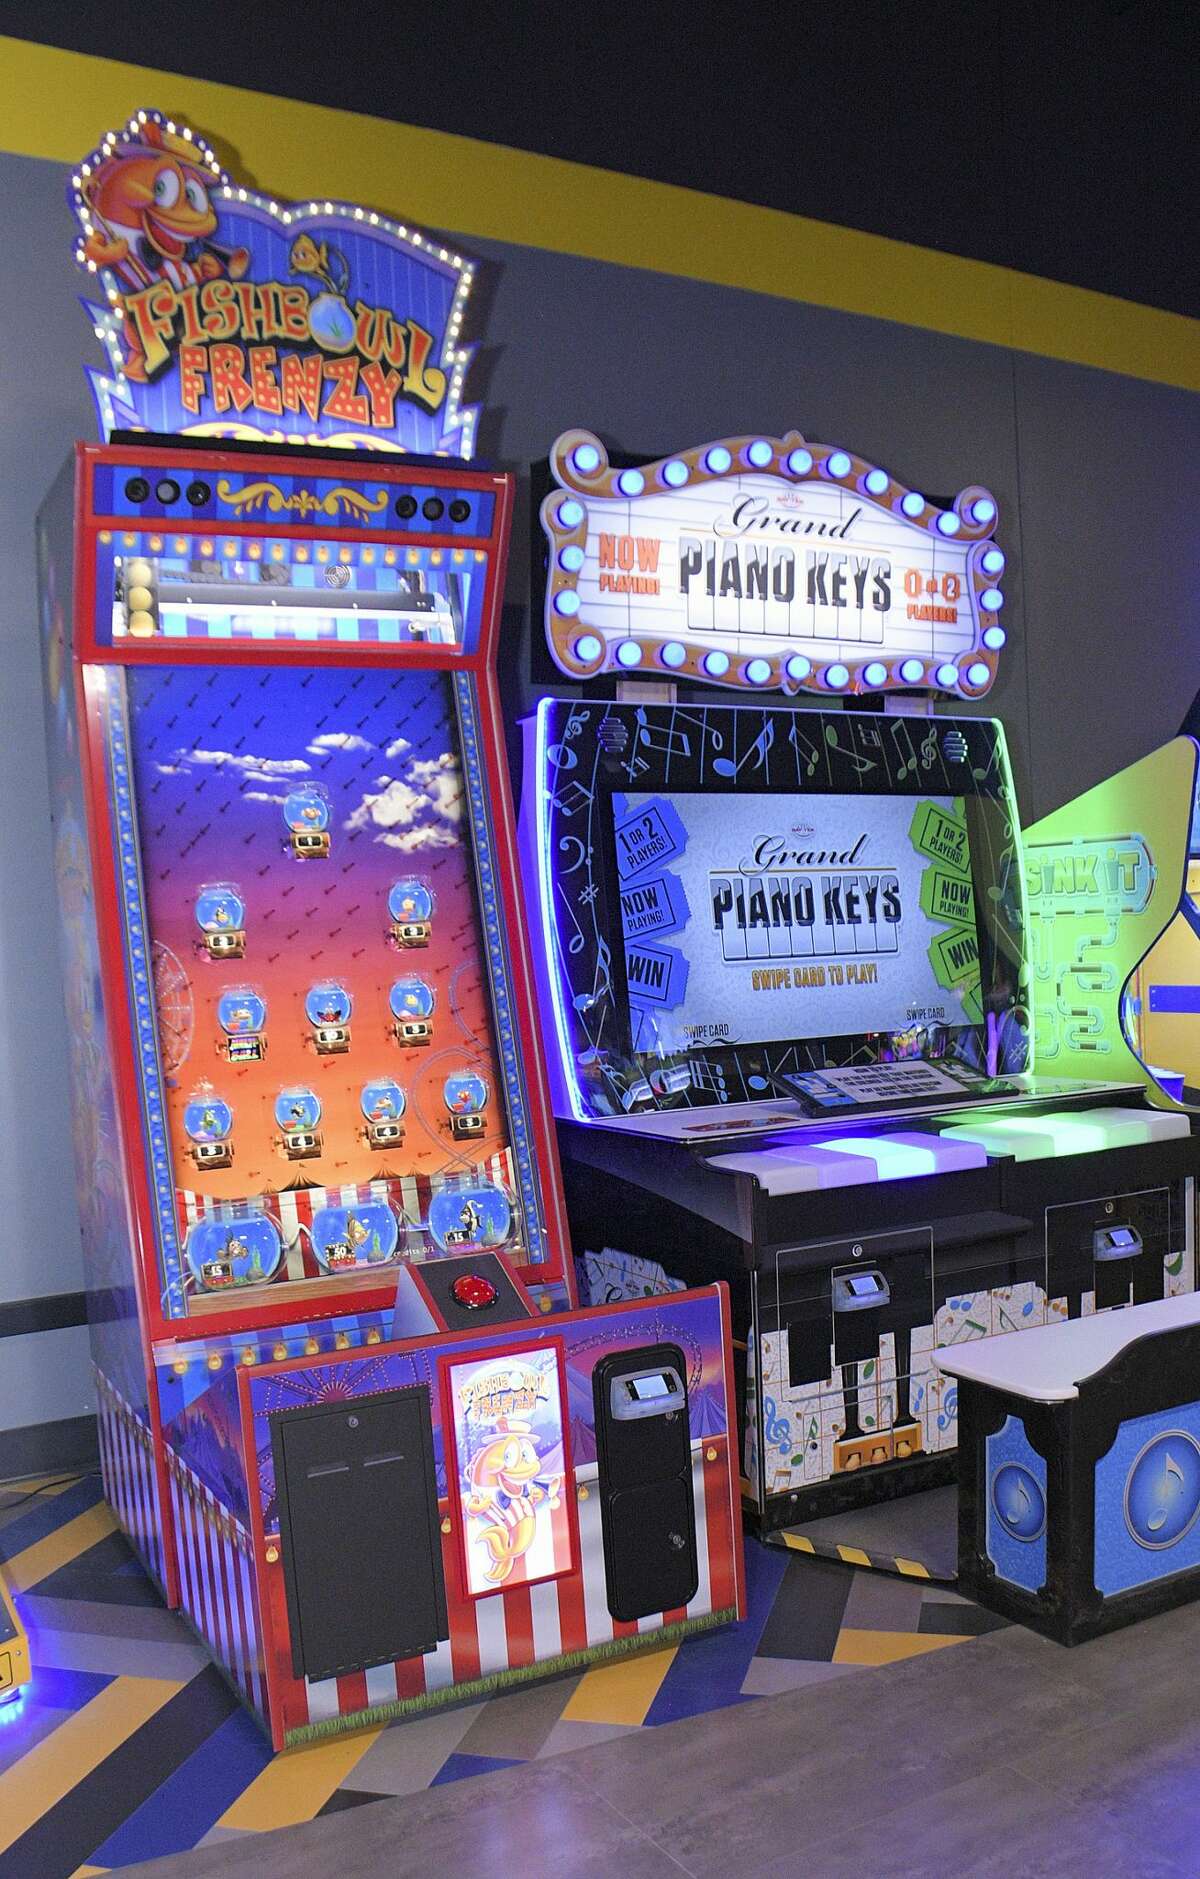 Bowling, arcade games and mini-golf are just some of the features seen during a first look in Main Event, Wednesday, Jan. 22, 2020, in Laredo, TX.